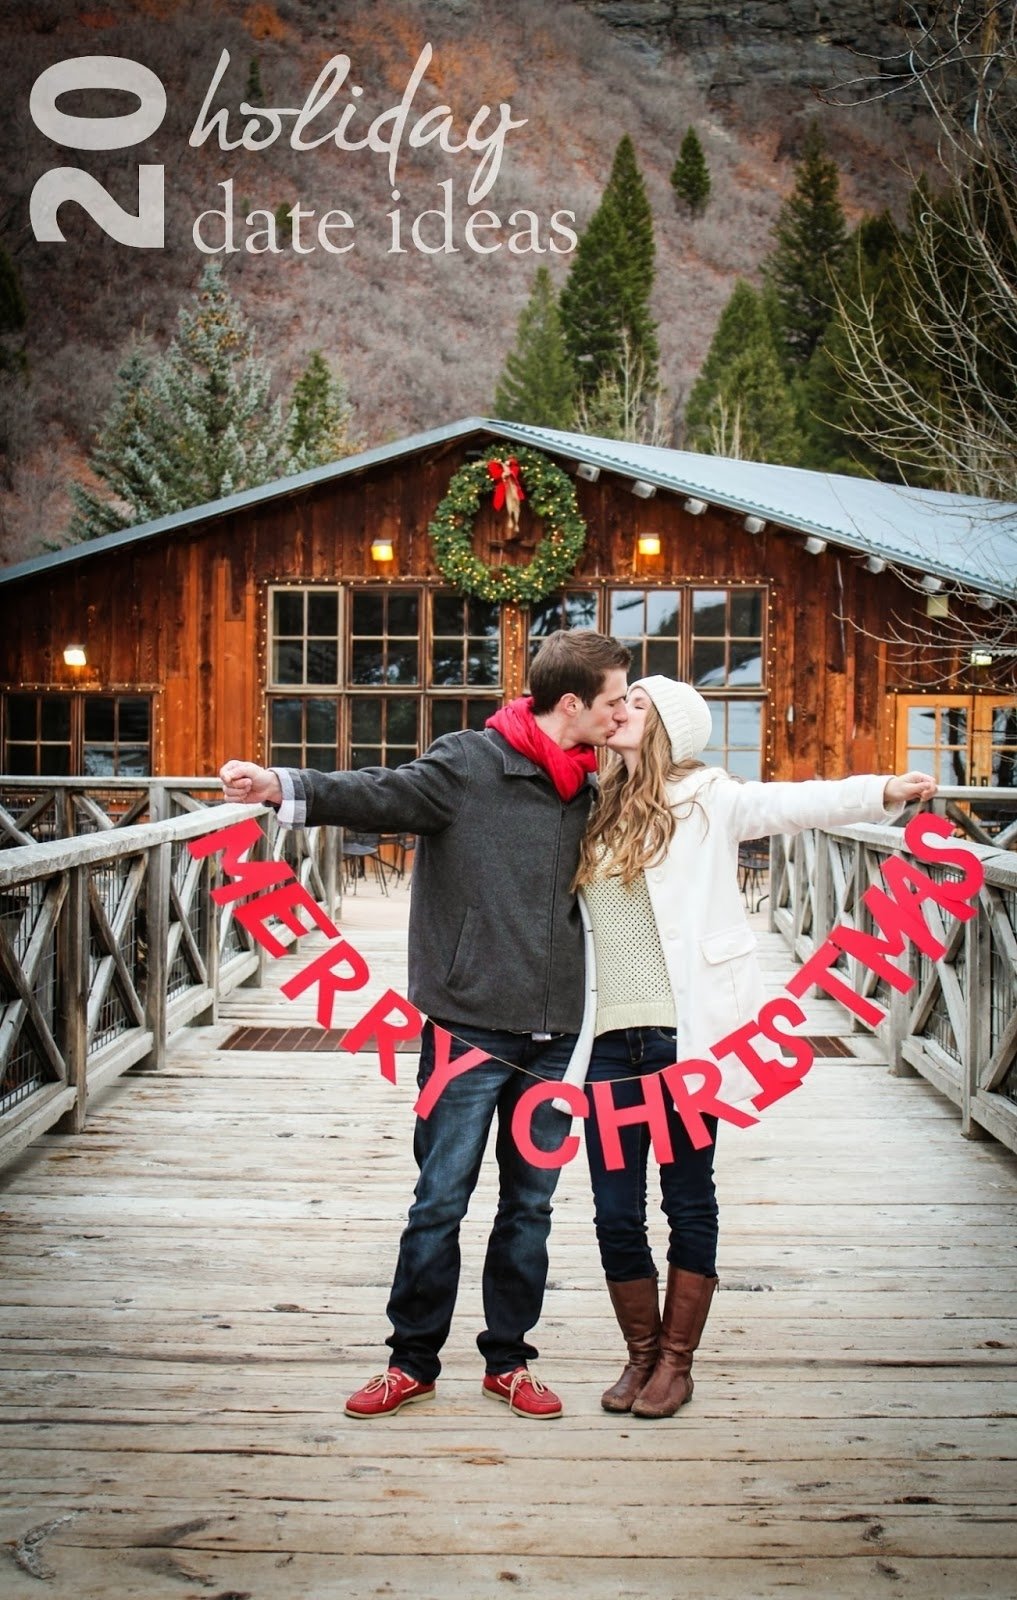 10 Spectacular Christmas Card Photo Ideas For Couples these are so fun 20 holiday date ideas www bellatheblog date 3 2022